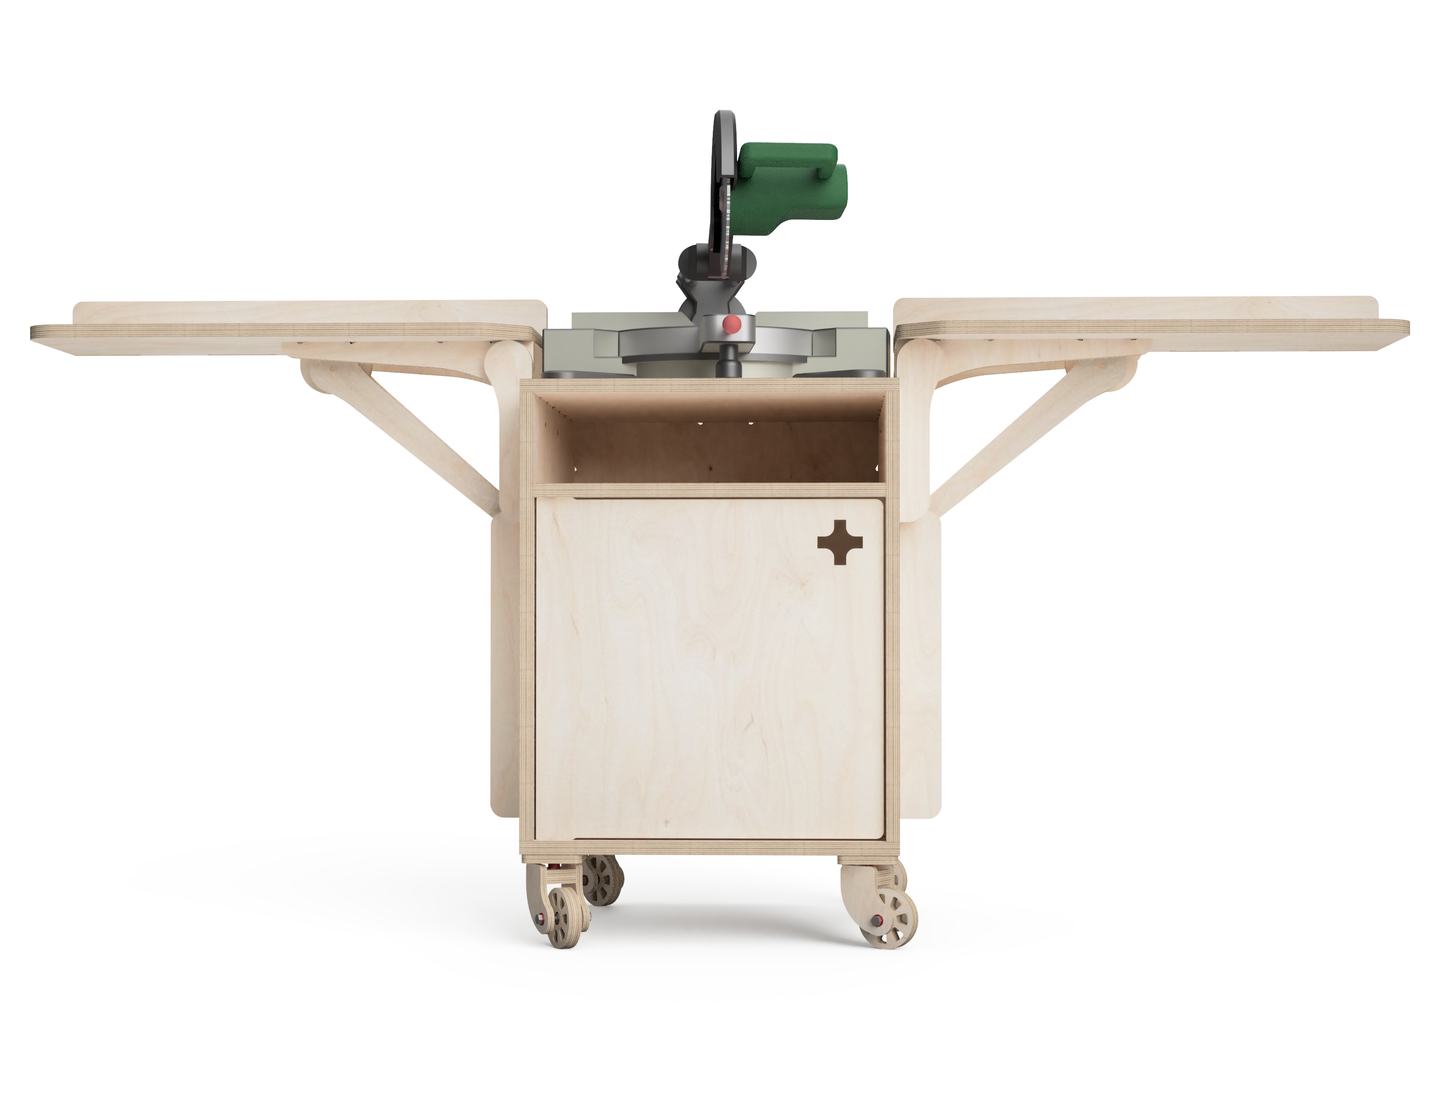 Mobile Miter Saw Station DXF Files